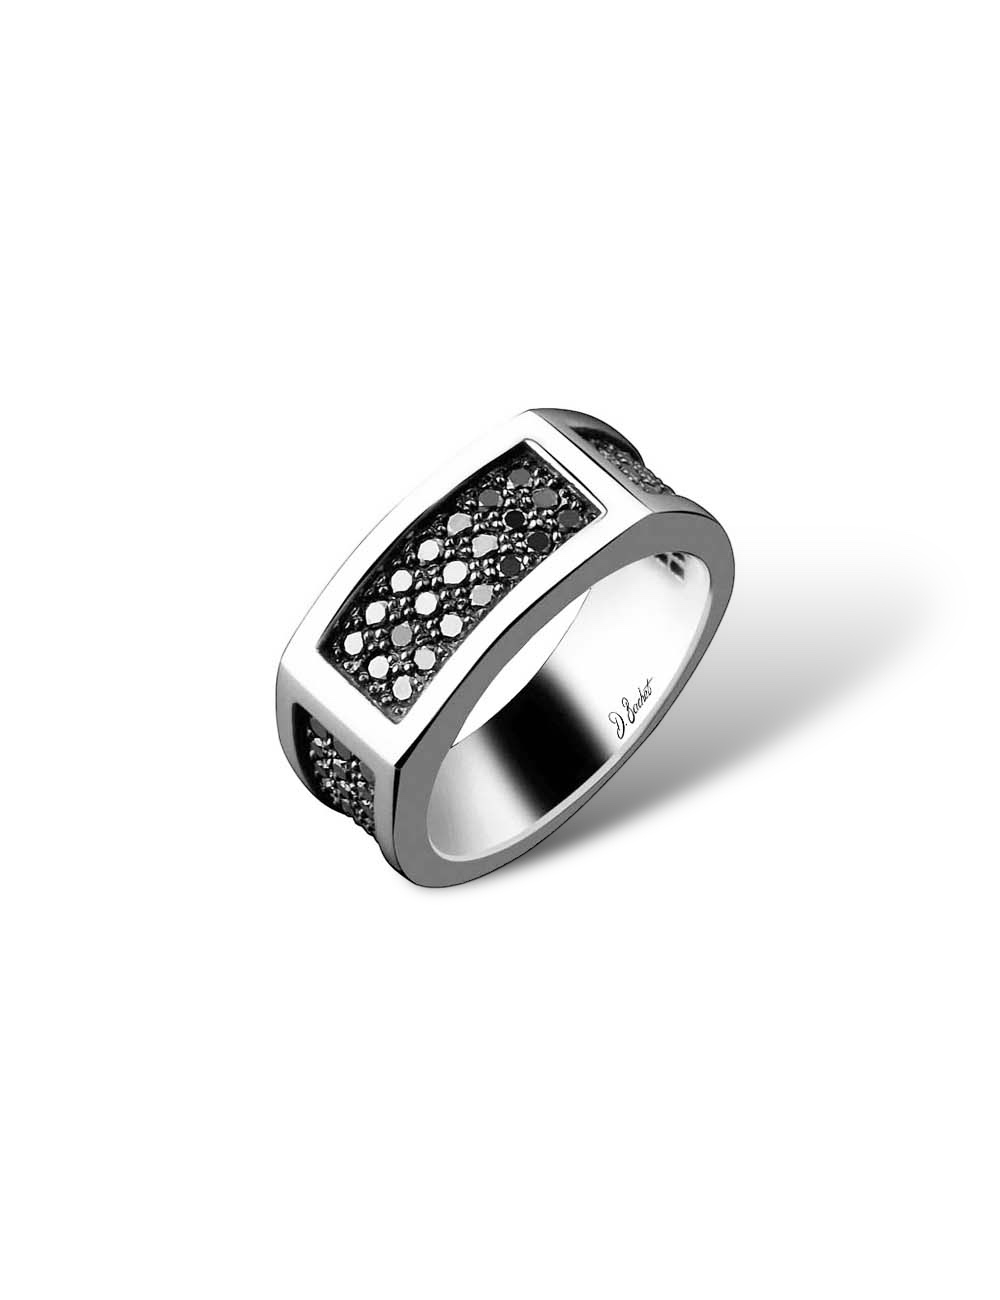 Men's platinum ring with black diamond pavé, an exceptional choice for a unique and bold engagement ring.